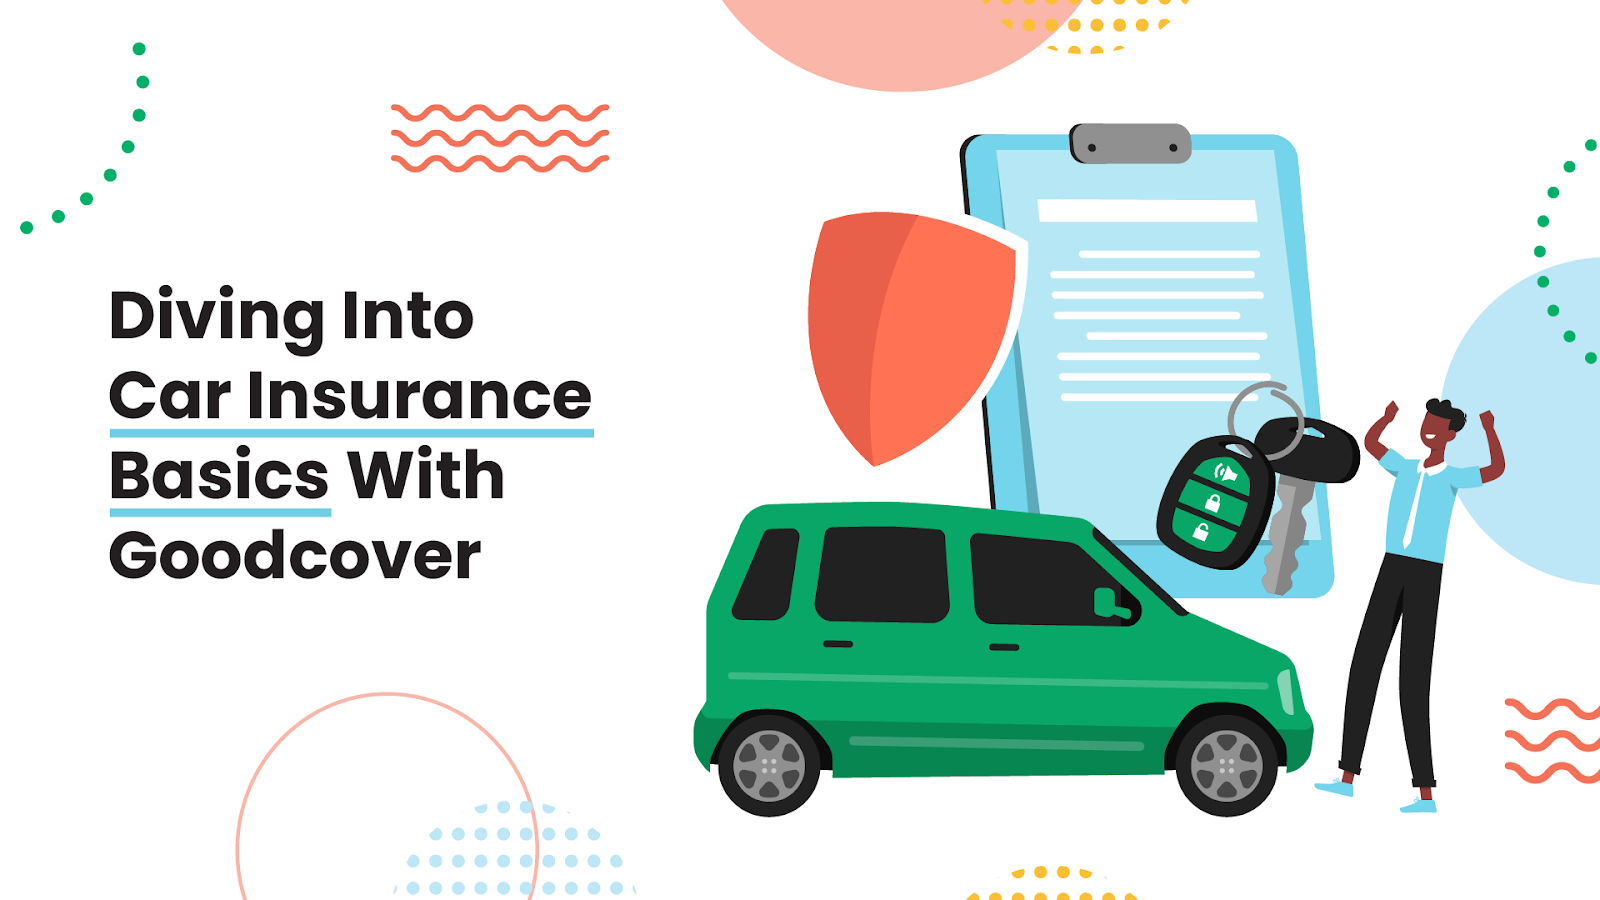 Explore Car Insurance Basics With Goodcover.